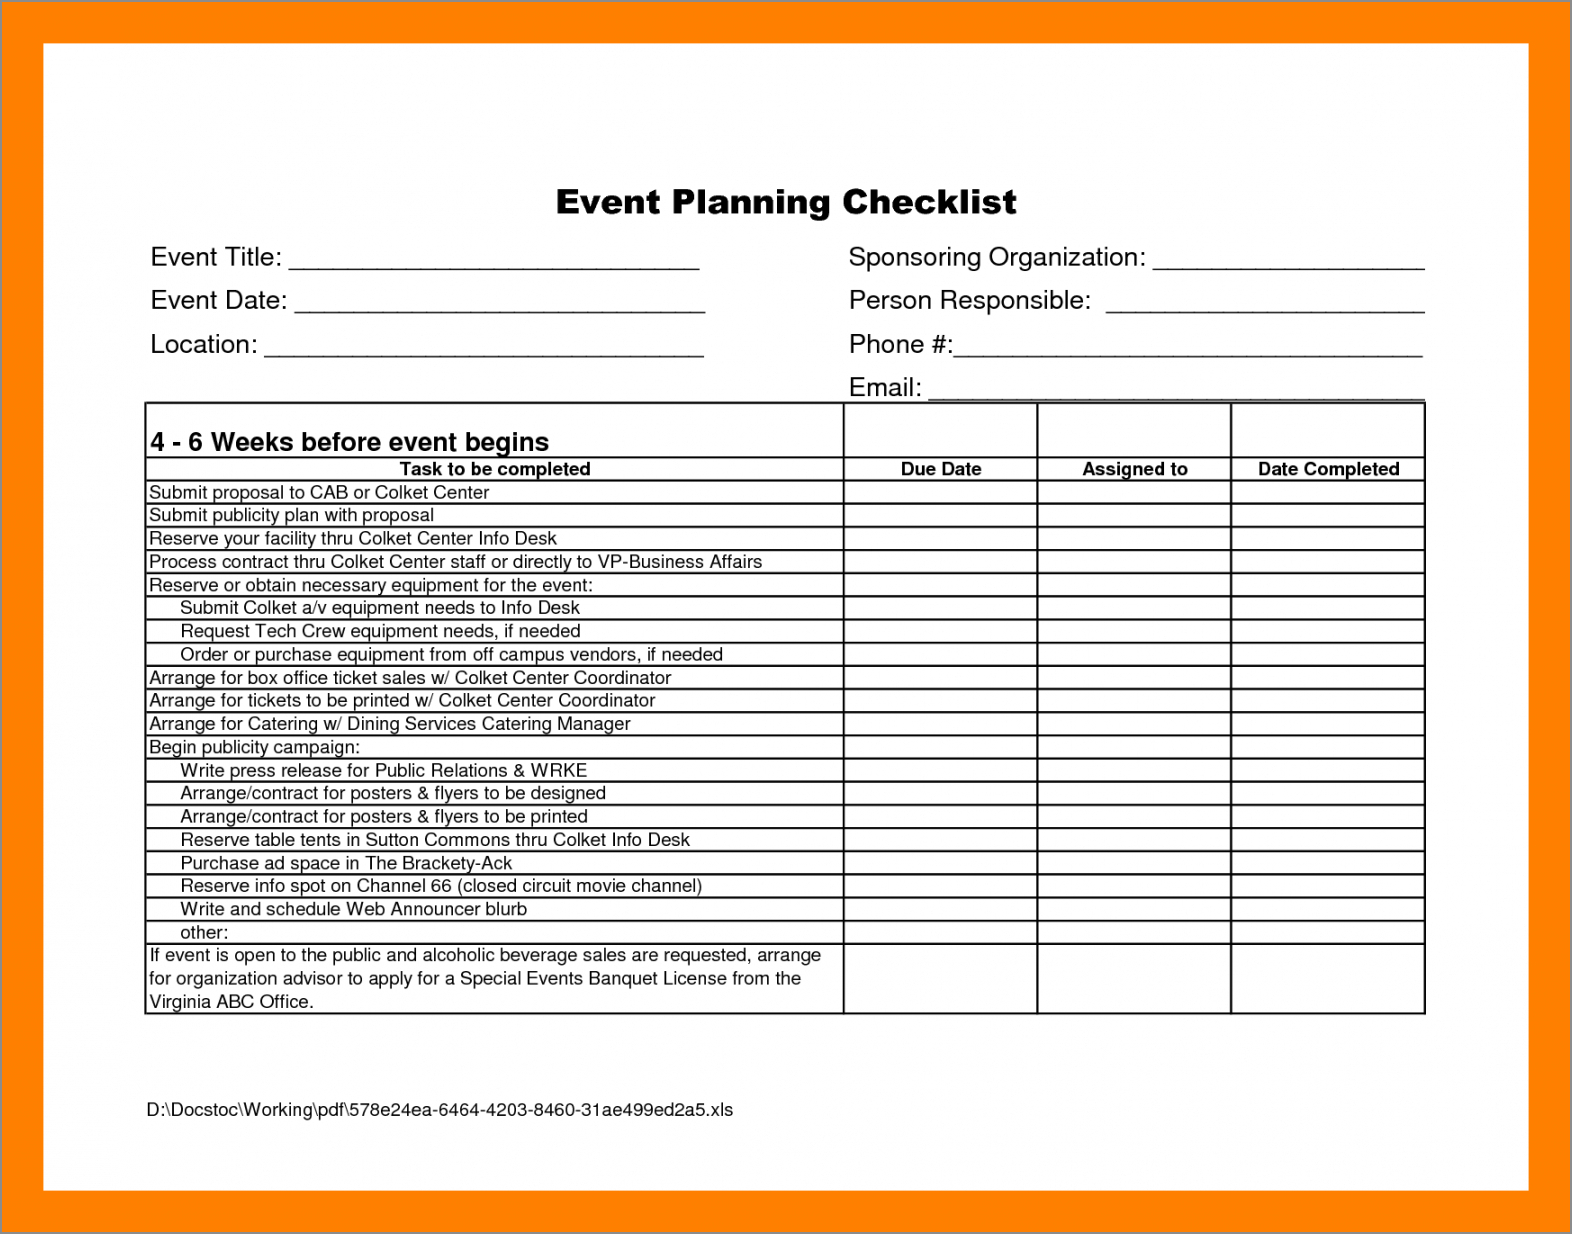 corporate event planning checklist template